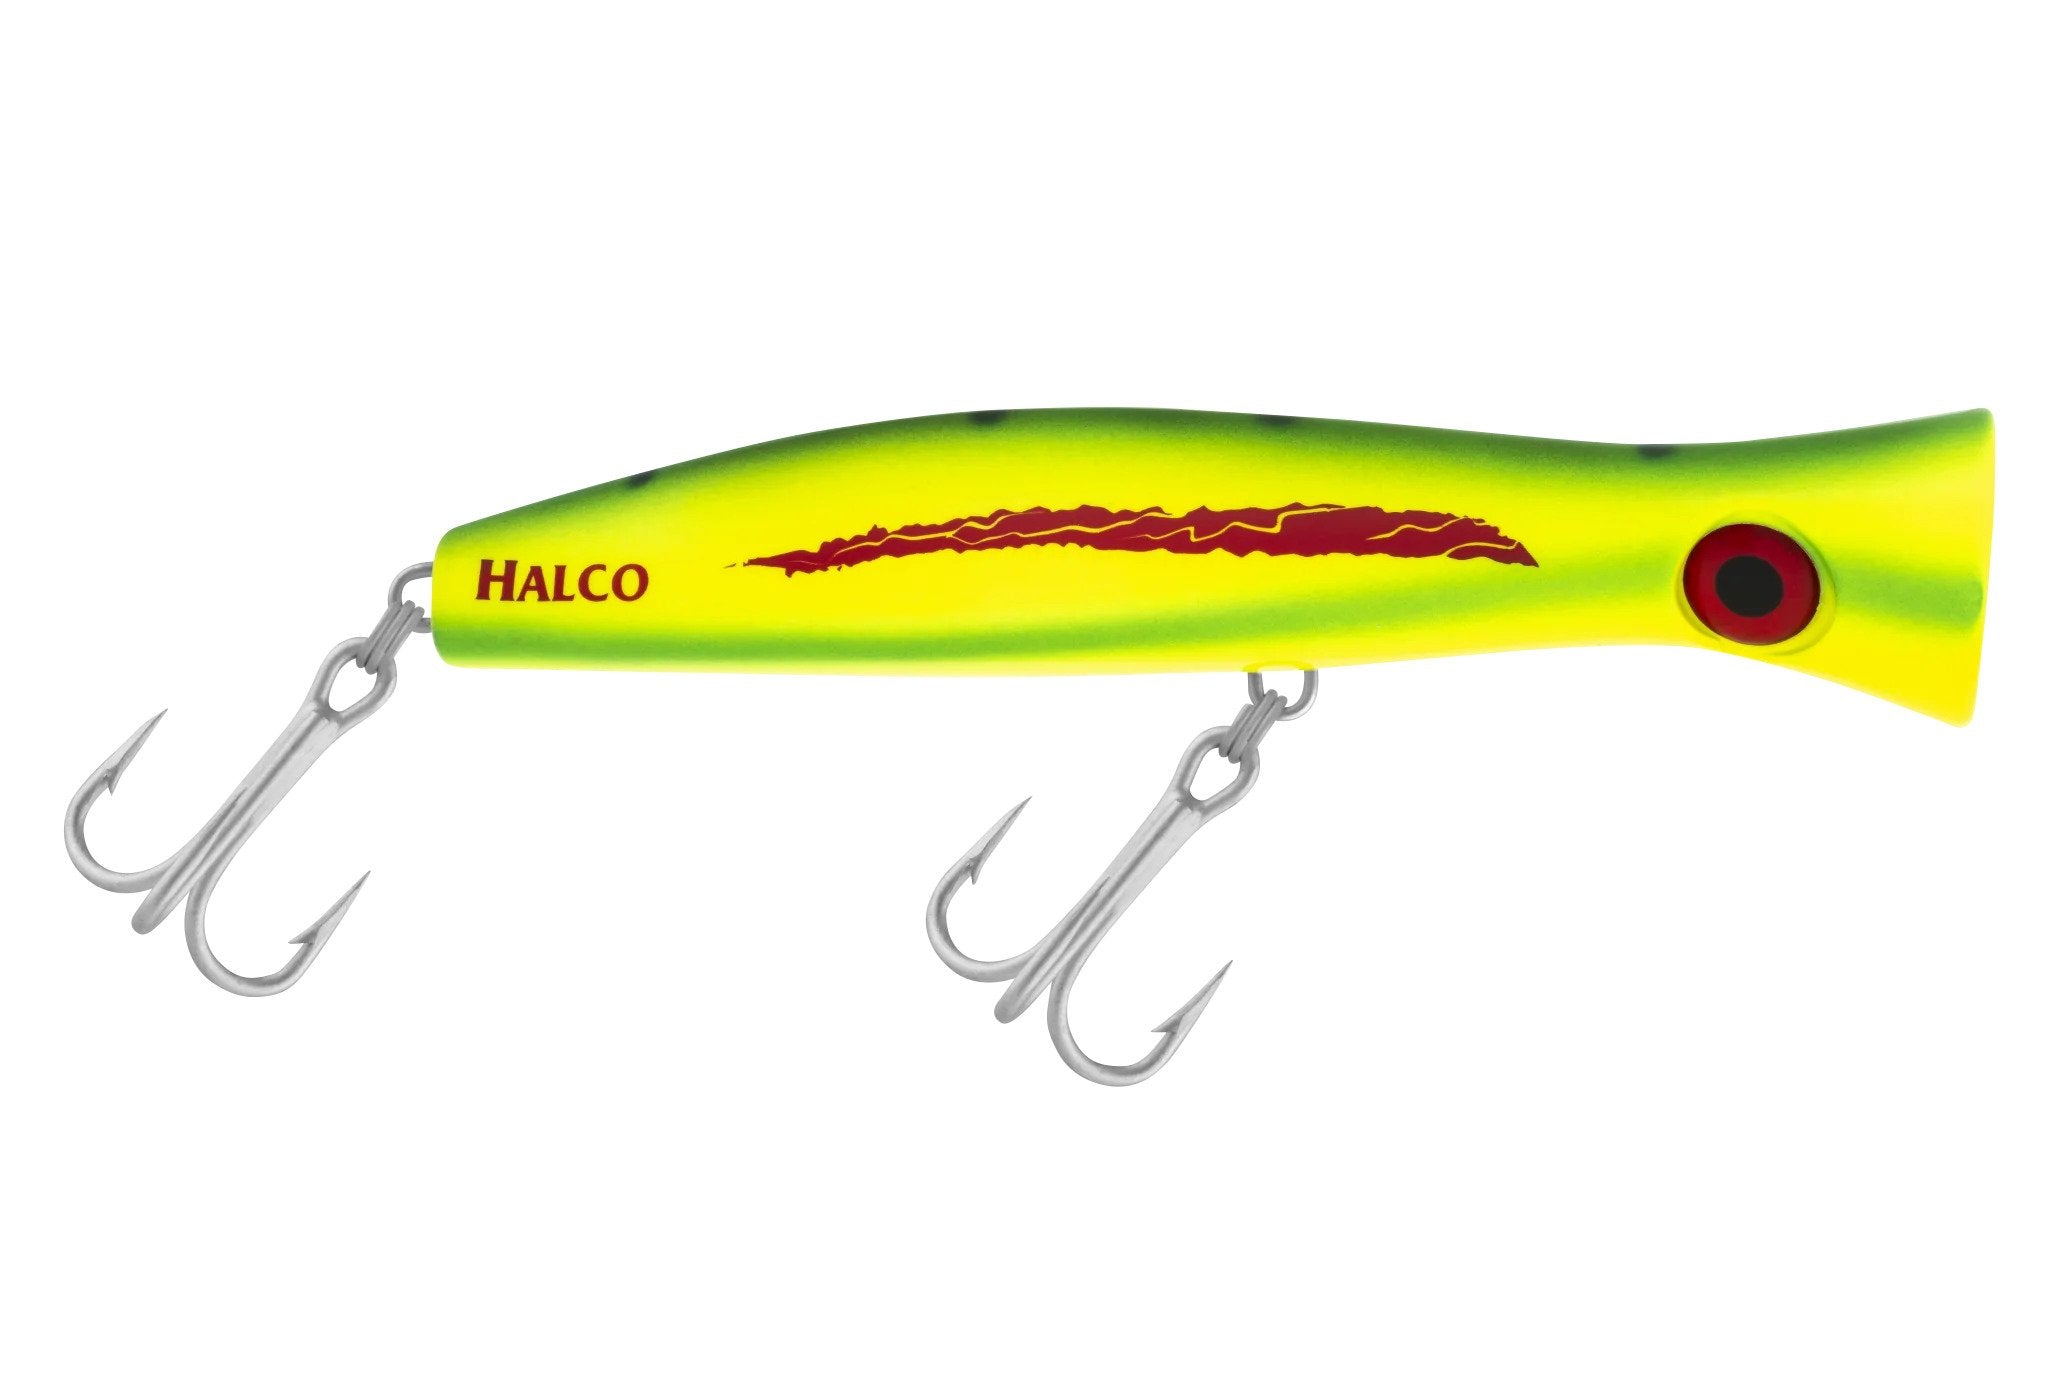 Halco Roosta Popper Casting Lures (2 3/8-7 7/8", 1/4-4 1/4oz, Multiple Colors)